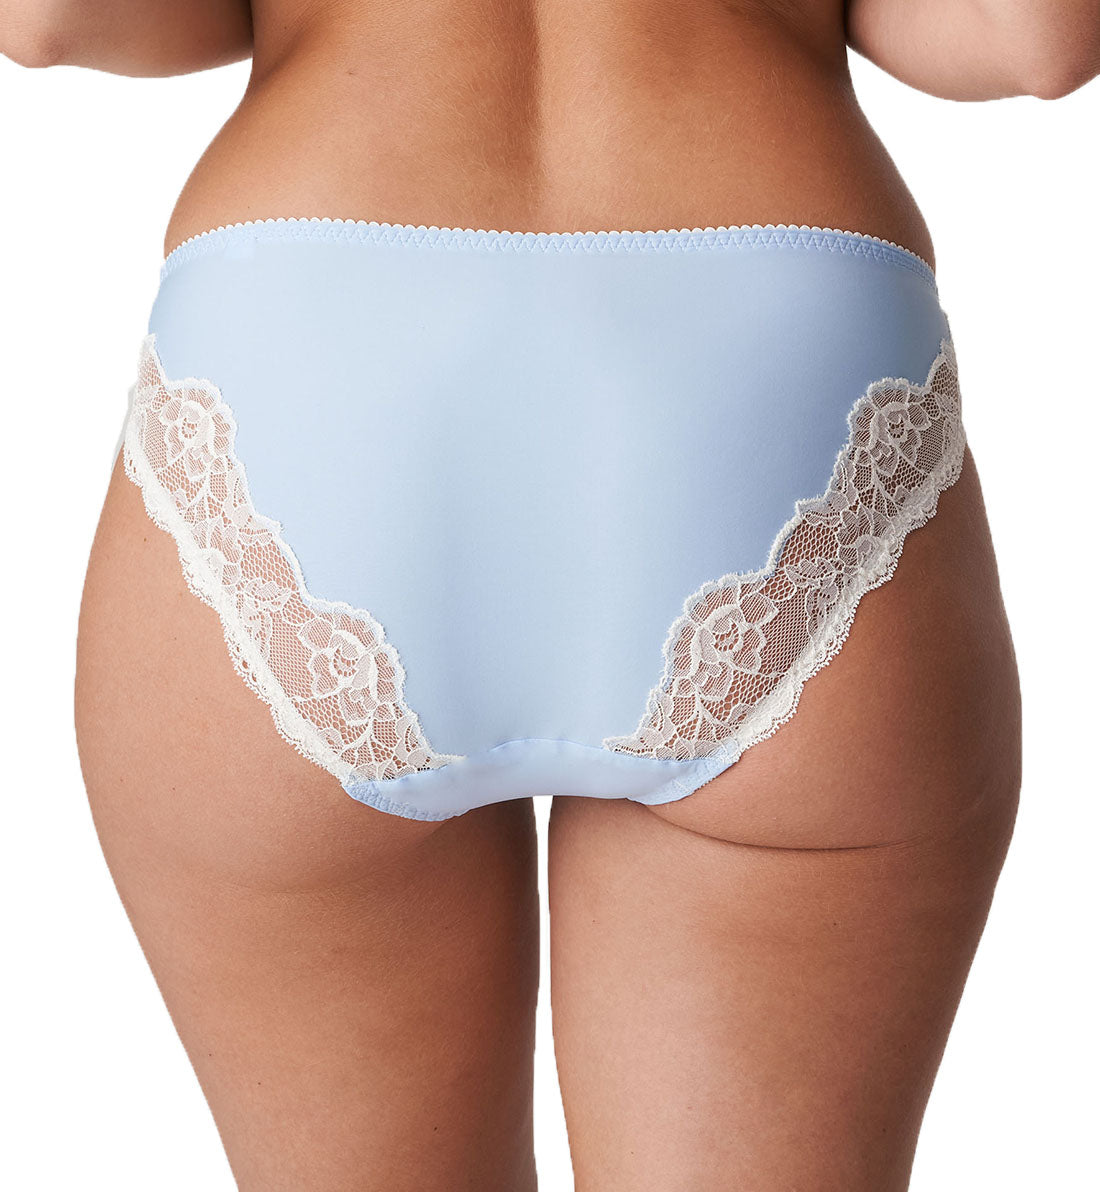 PrimaDonna Madison Matching Rio Brief (0562125),Large,Blue Bell - Blue Bell,Large